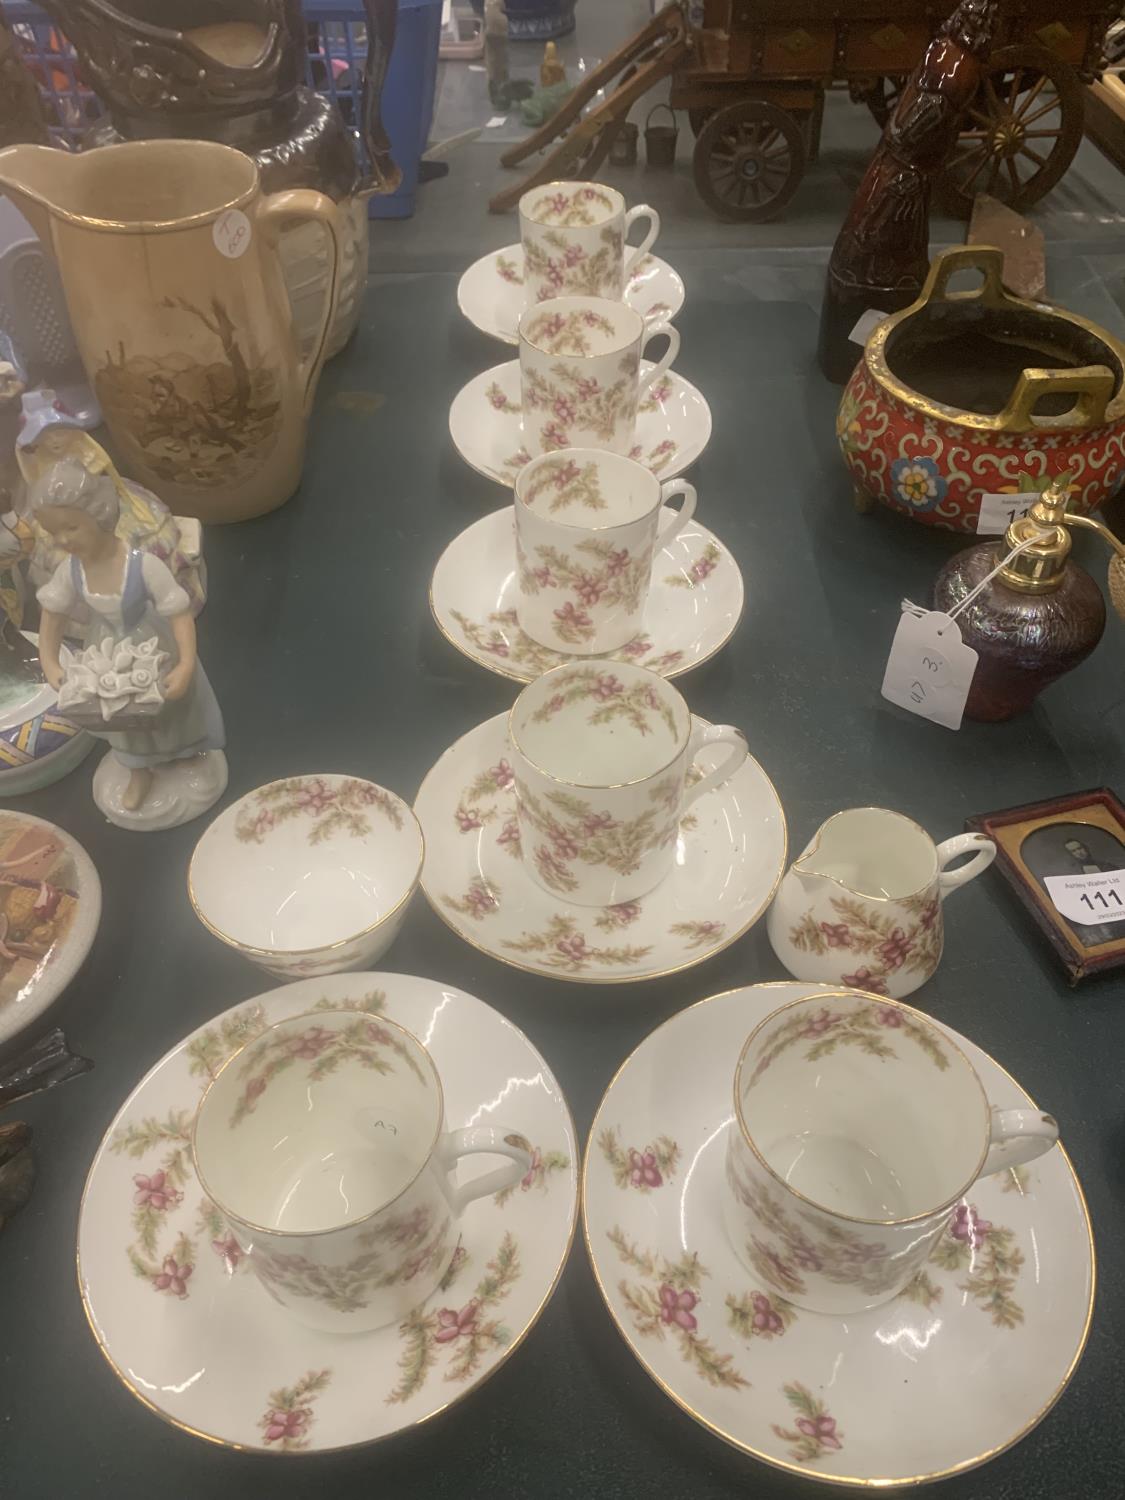 A VINTAGE CHINA PART TEASET WITH PINK FLORAL PATTERN TO INCLUDE CUPS, SAUCERS, CREAM JUG AND A SUGAR